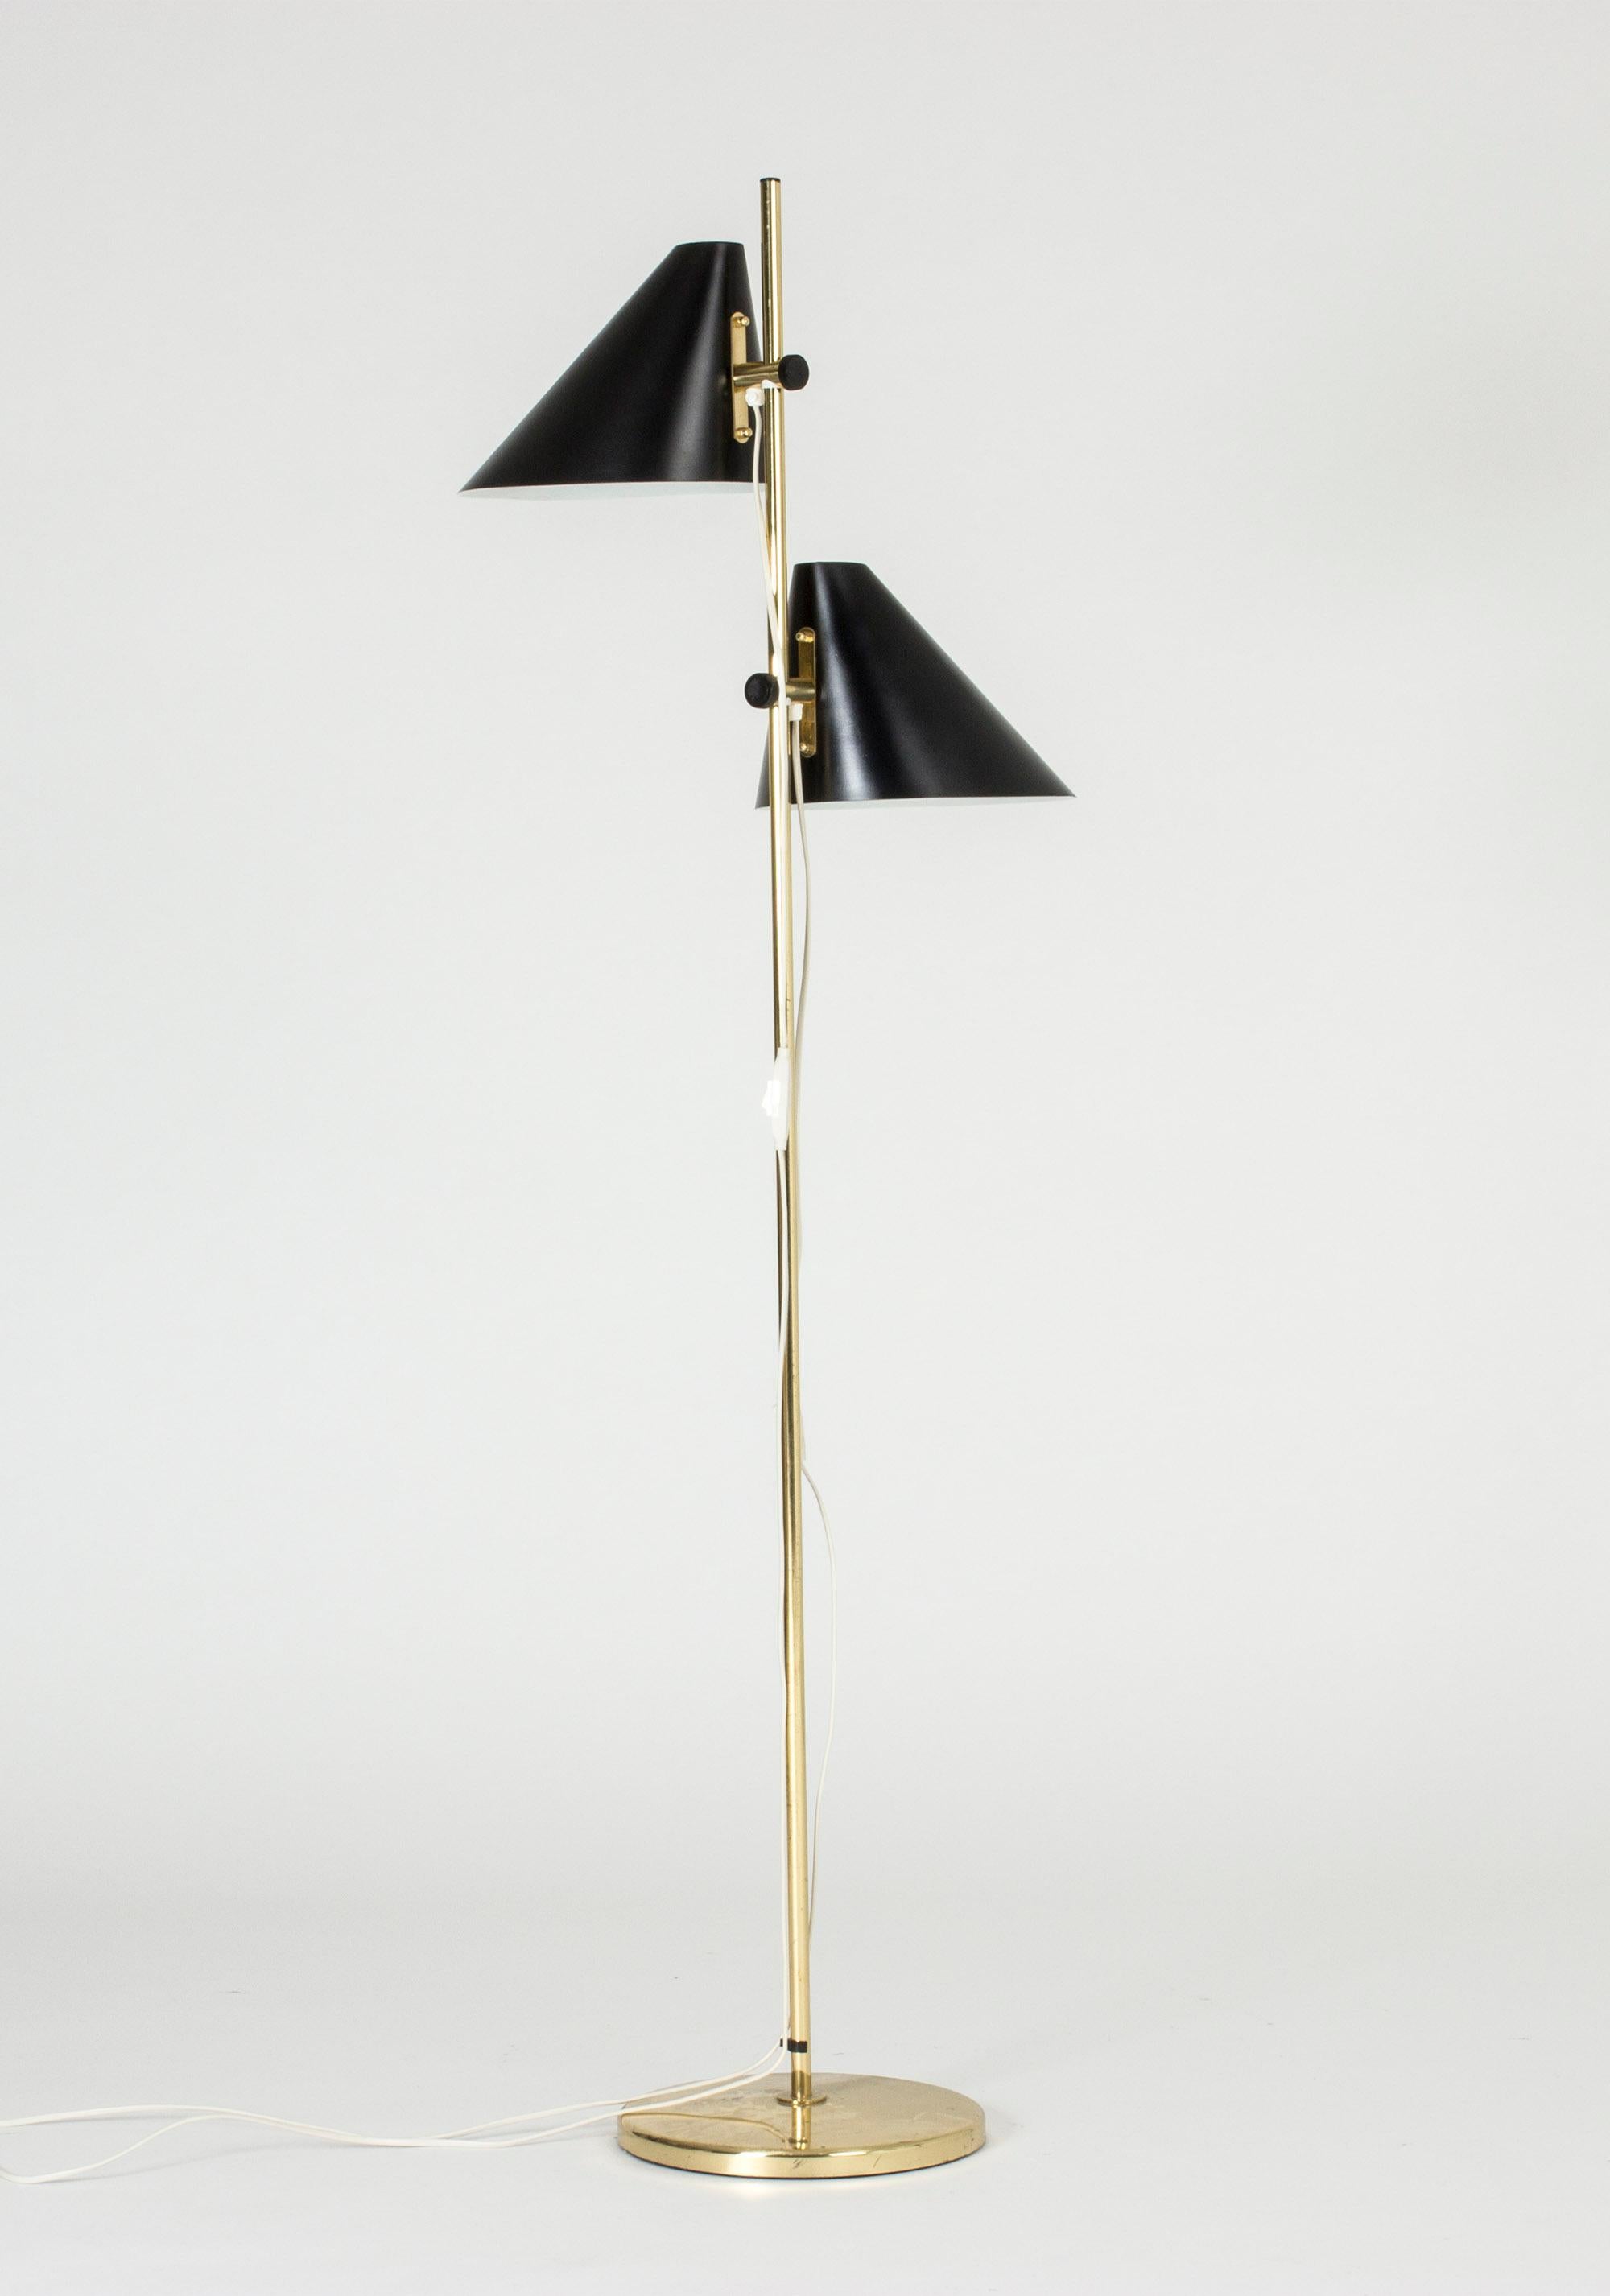 Striking brass floor lamp with two lamp shades by Hans-Agne Jakobsson. The black lacquered shades can be adjusted to different vertical positions and can also be turned around the pole.